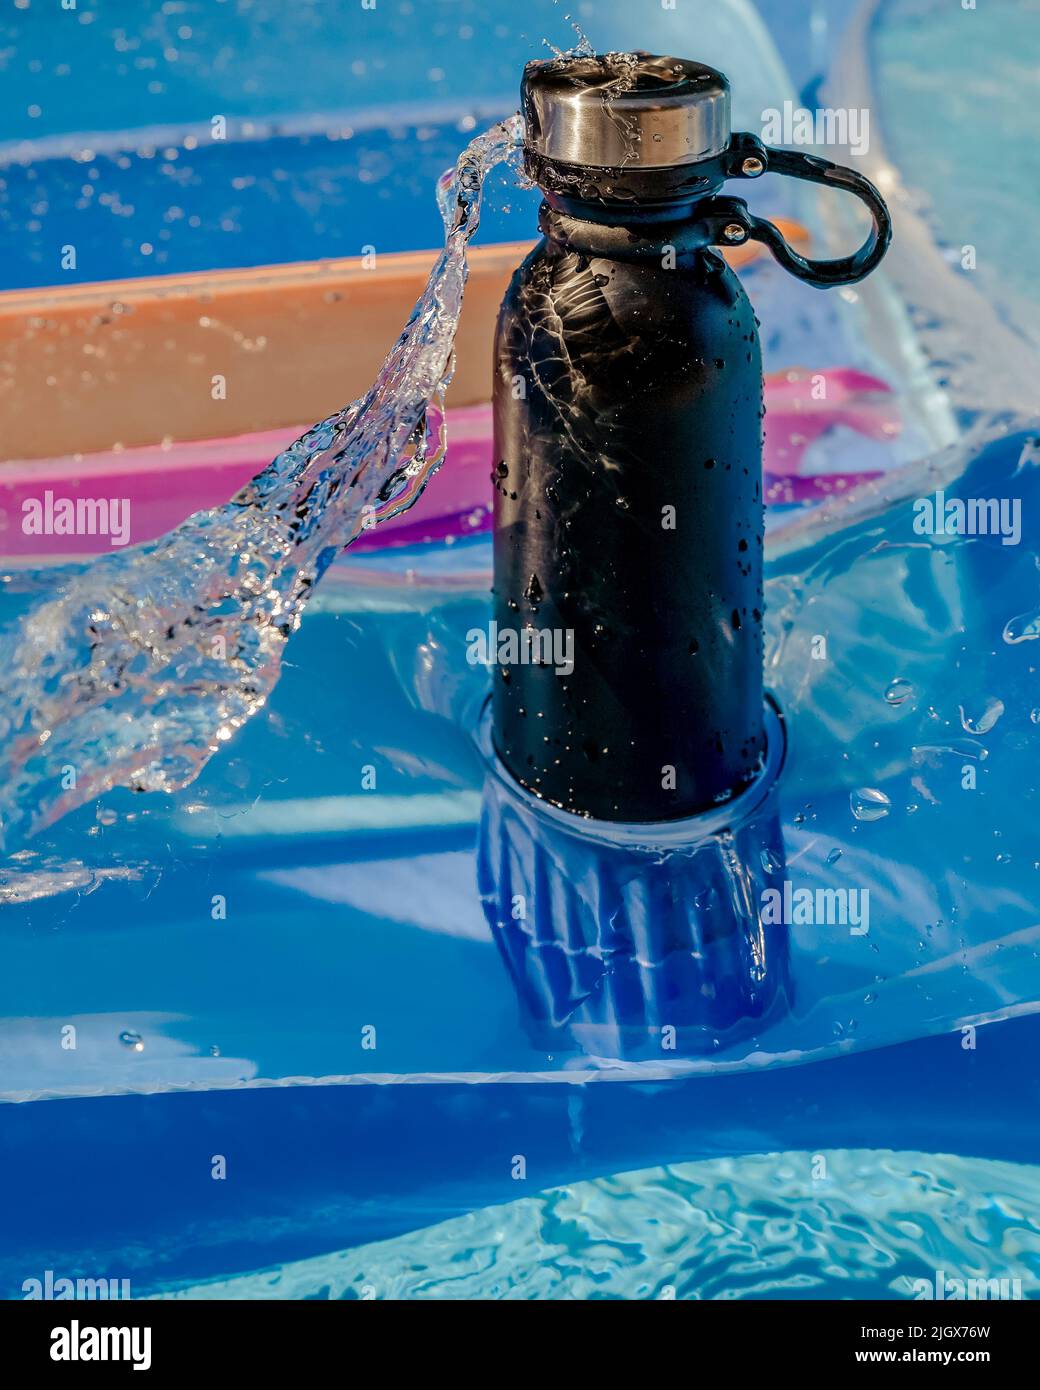 A black insulated bottle on an air mattress with a spray of water hitting it Stock Photo